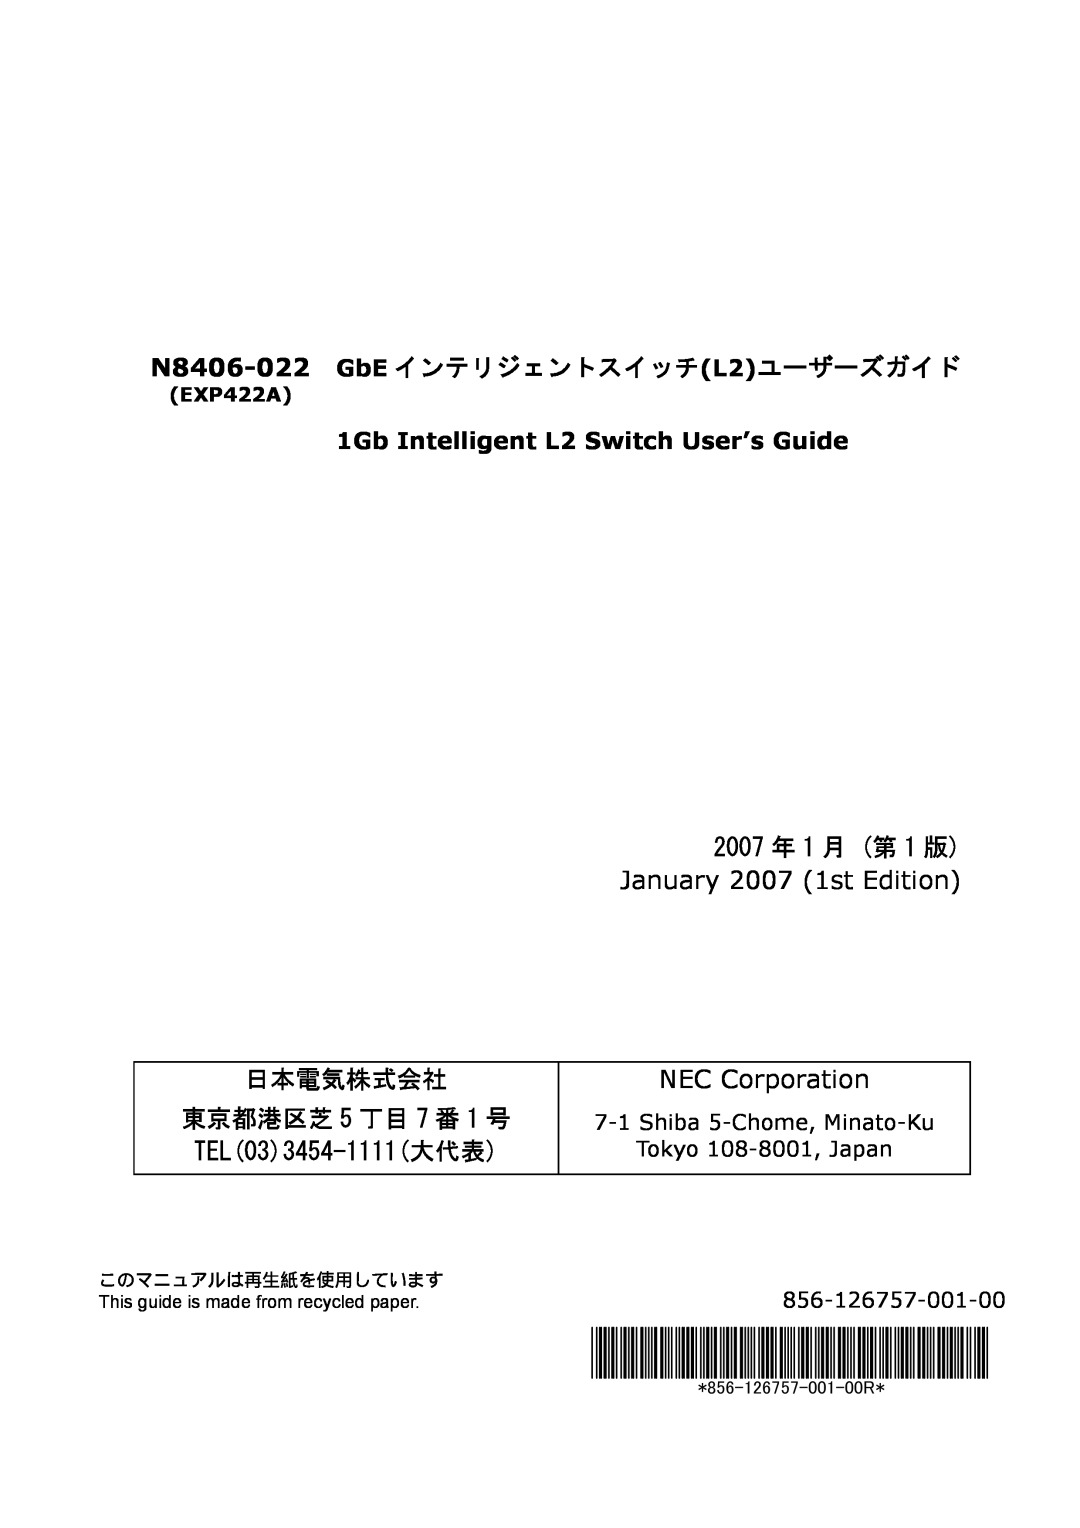 NEC 日本電気株式会社, N8406-022 GbE インテリジェントスイッチL2ユーザーズガイド, NEC Corporation, 1Gb Intelligent L2 Switch User’s Guide, EXP422A 